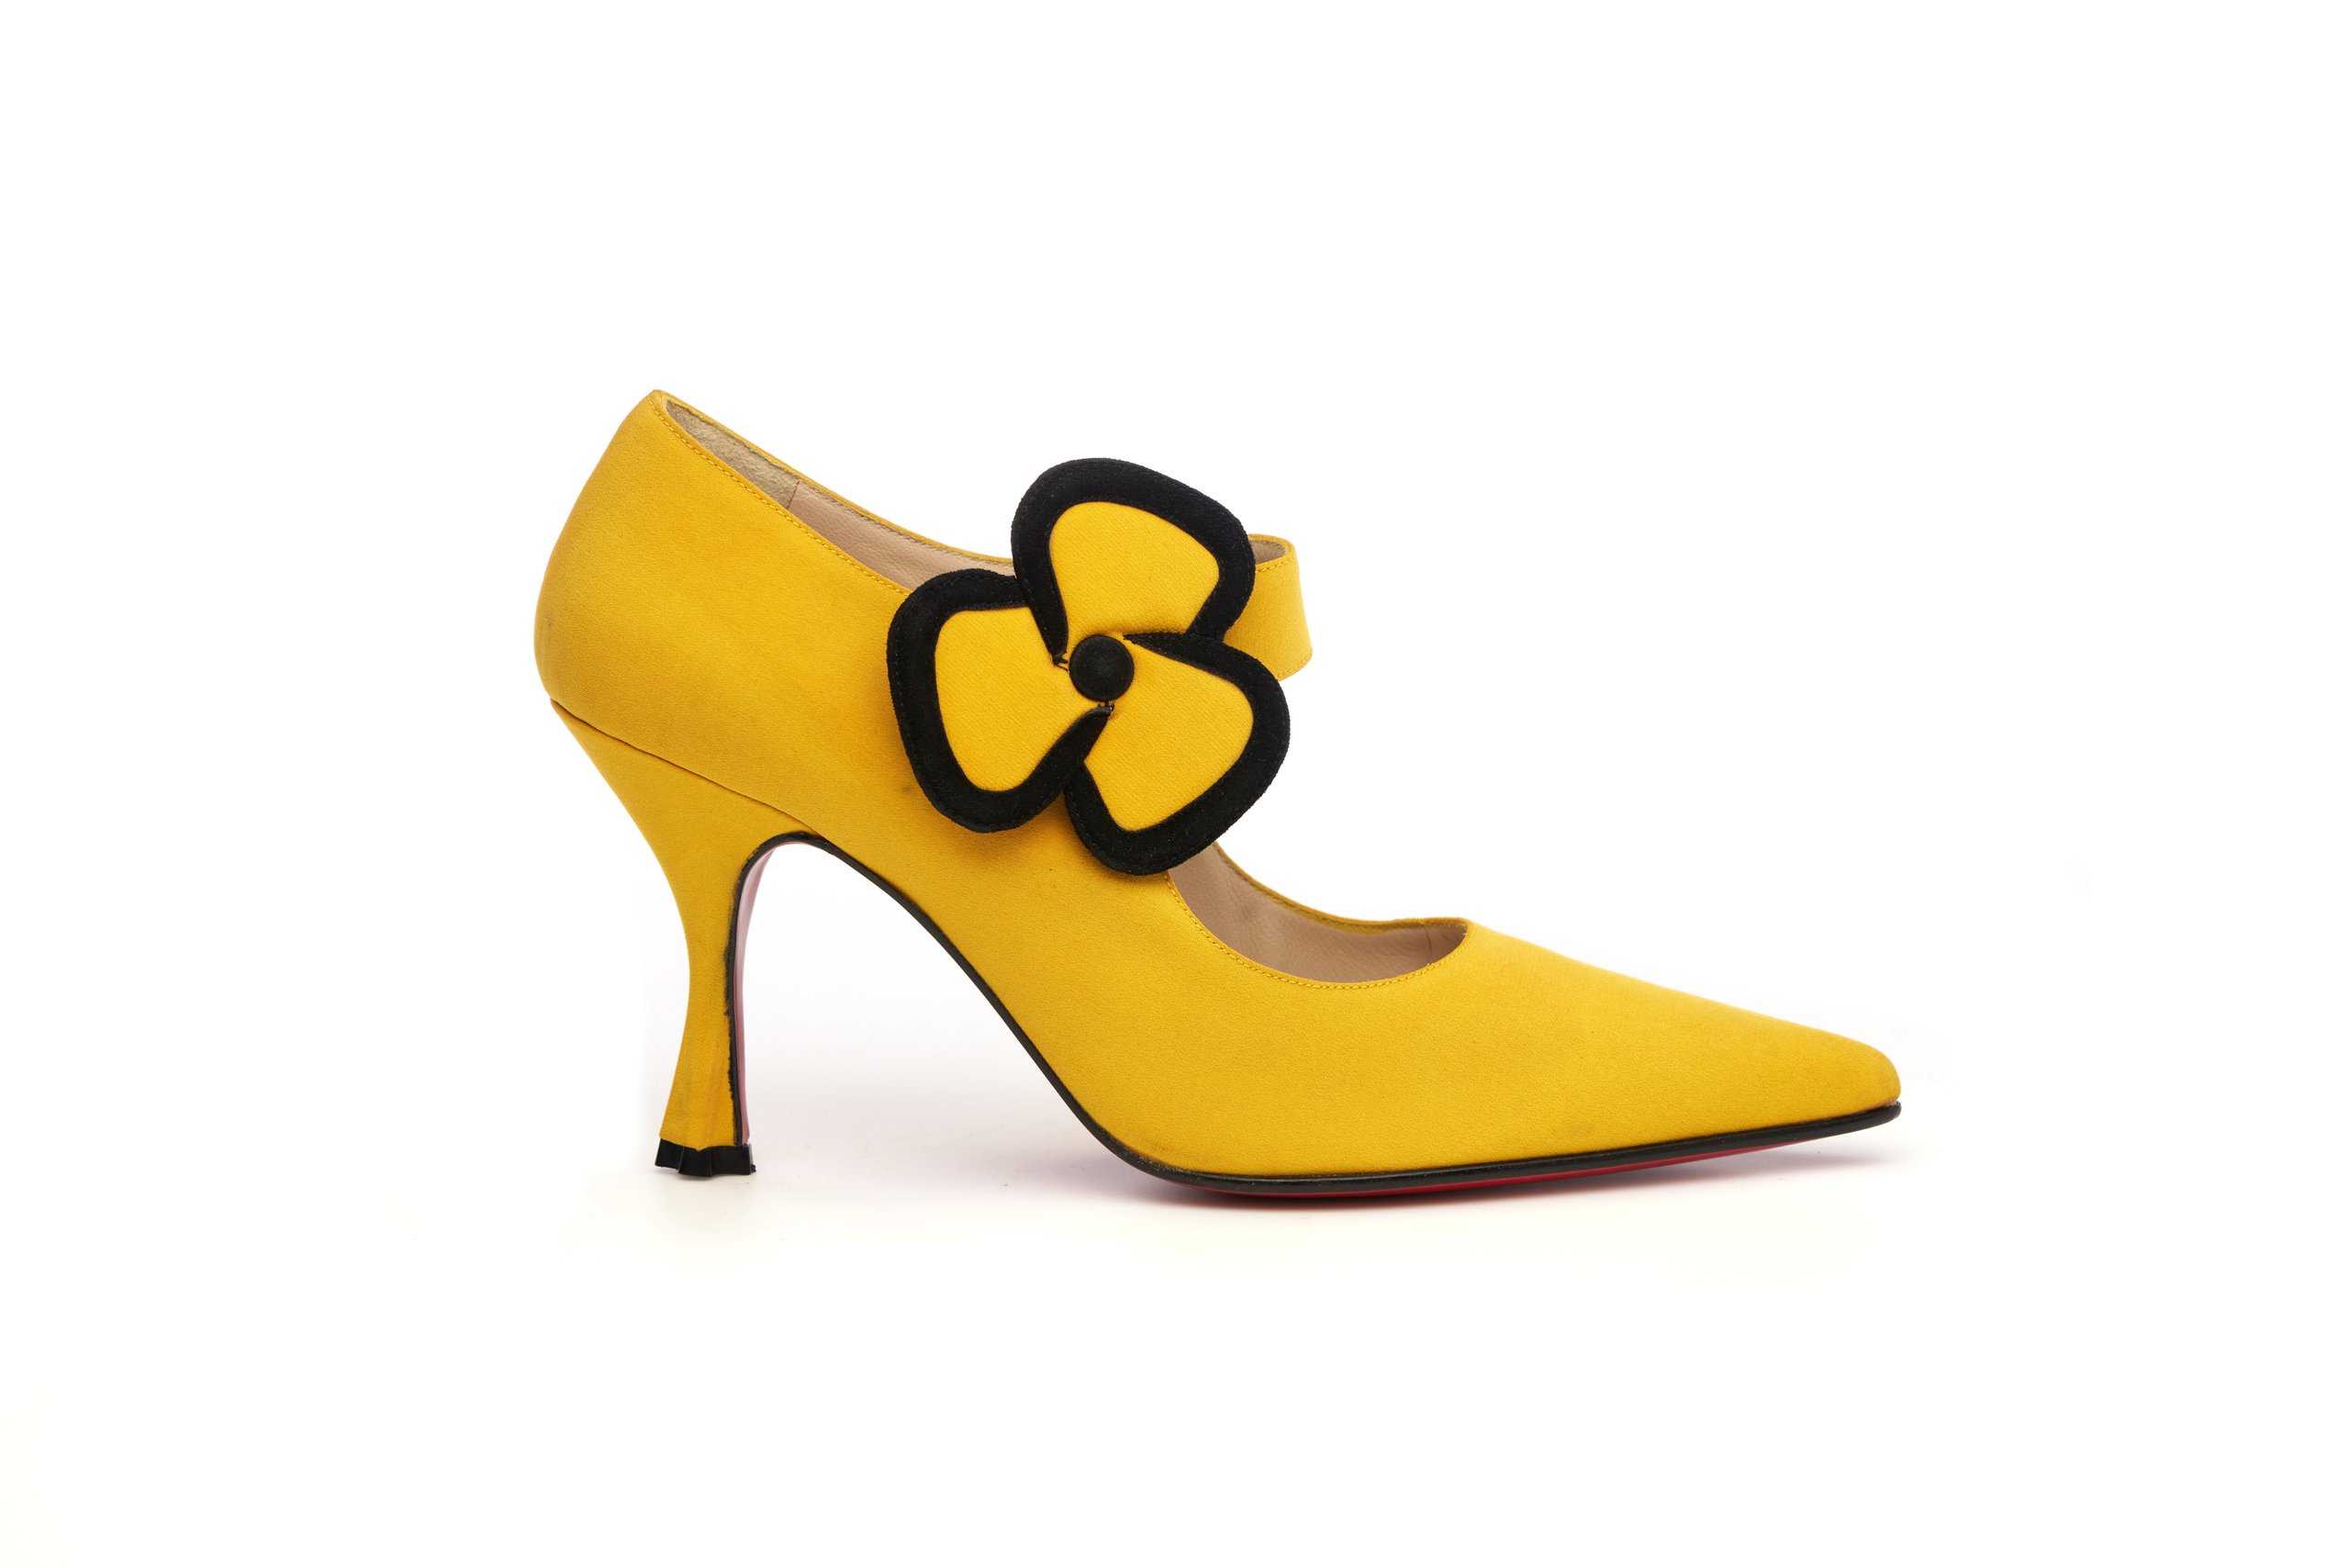 Powerhouse Collection - Pair of womens 'Pensee' shoes by Christian Louboutin